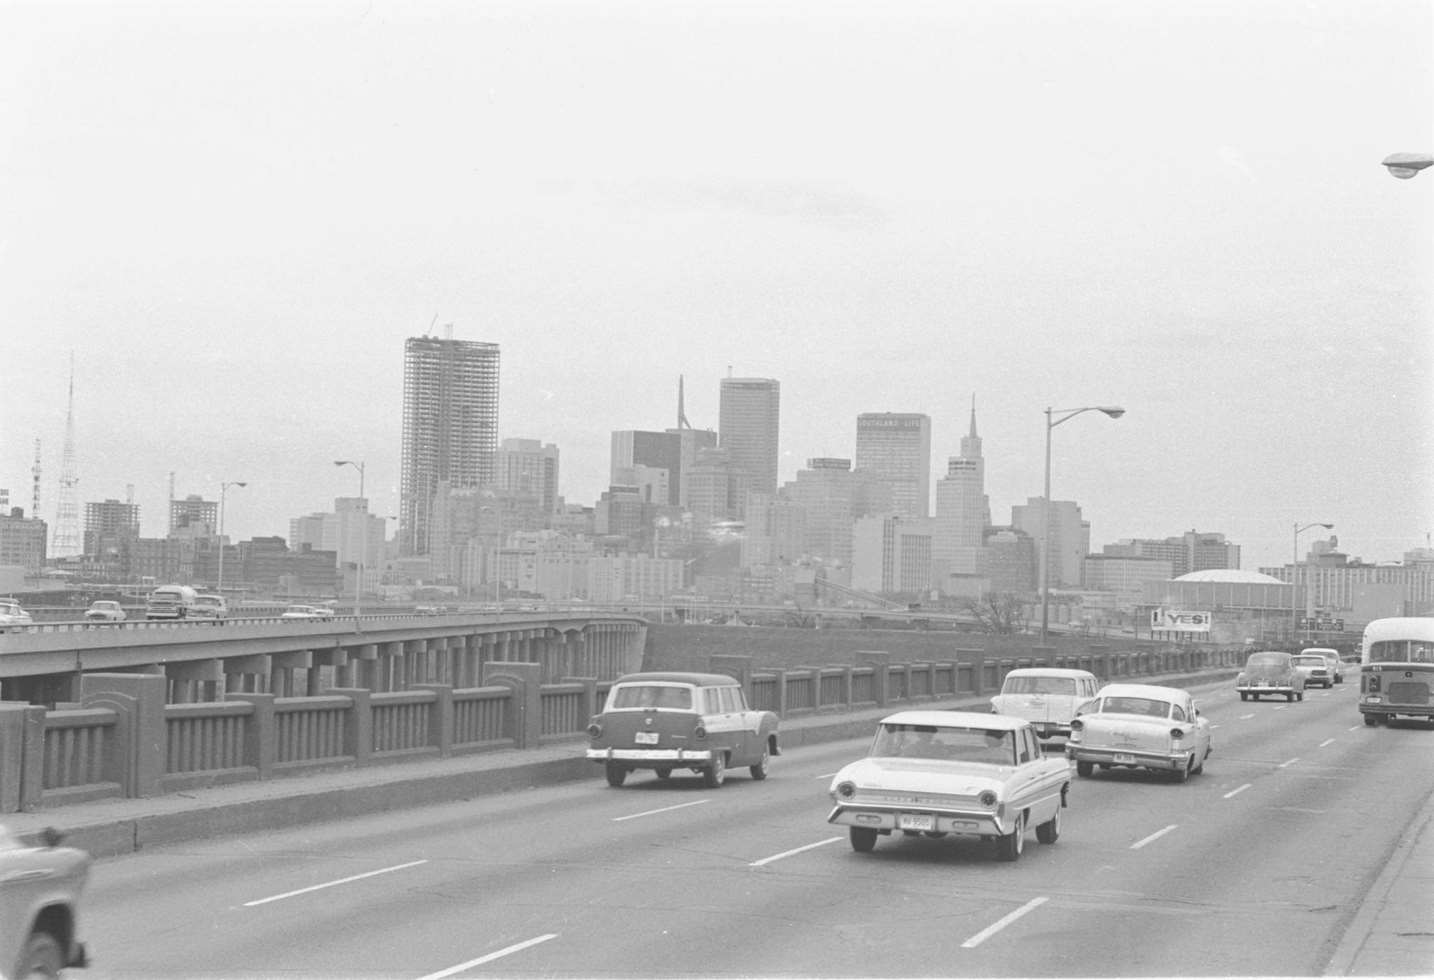 Cars on the highway in front of Dallas, 1959